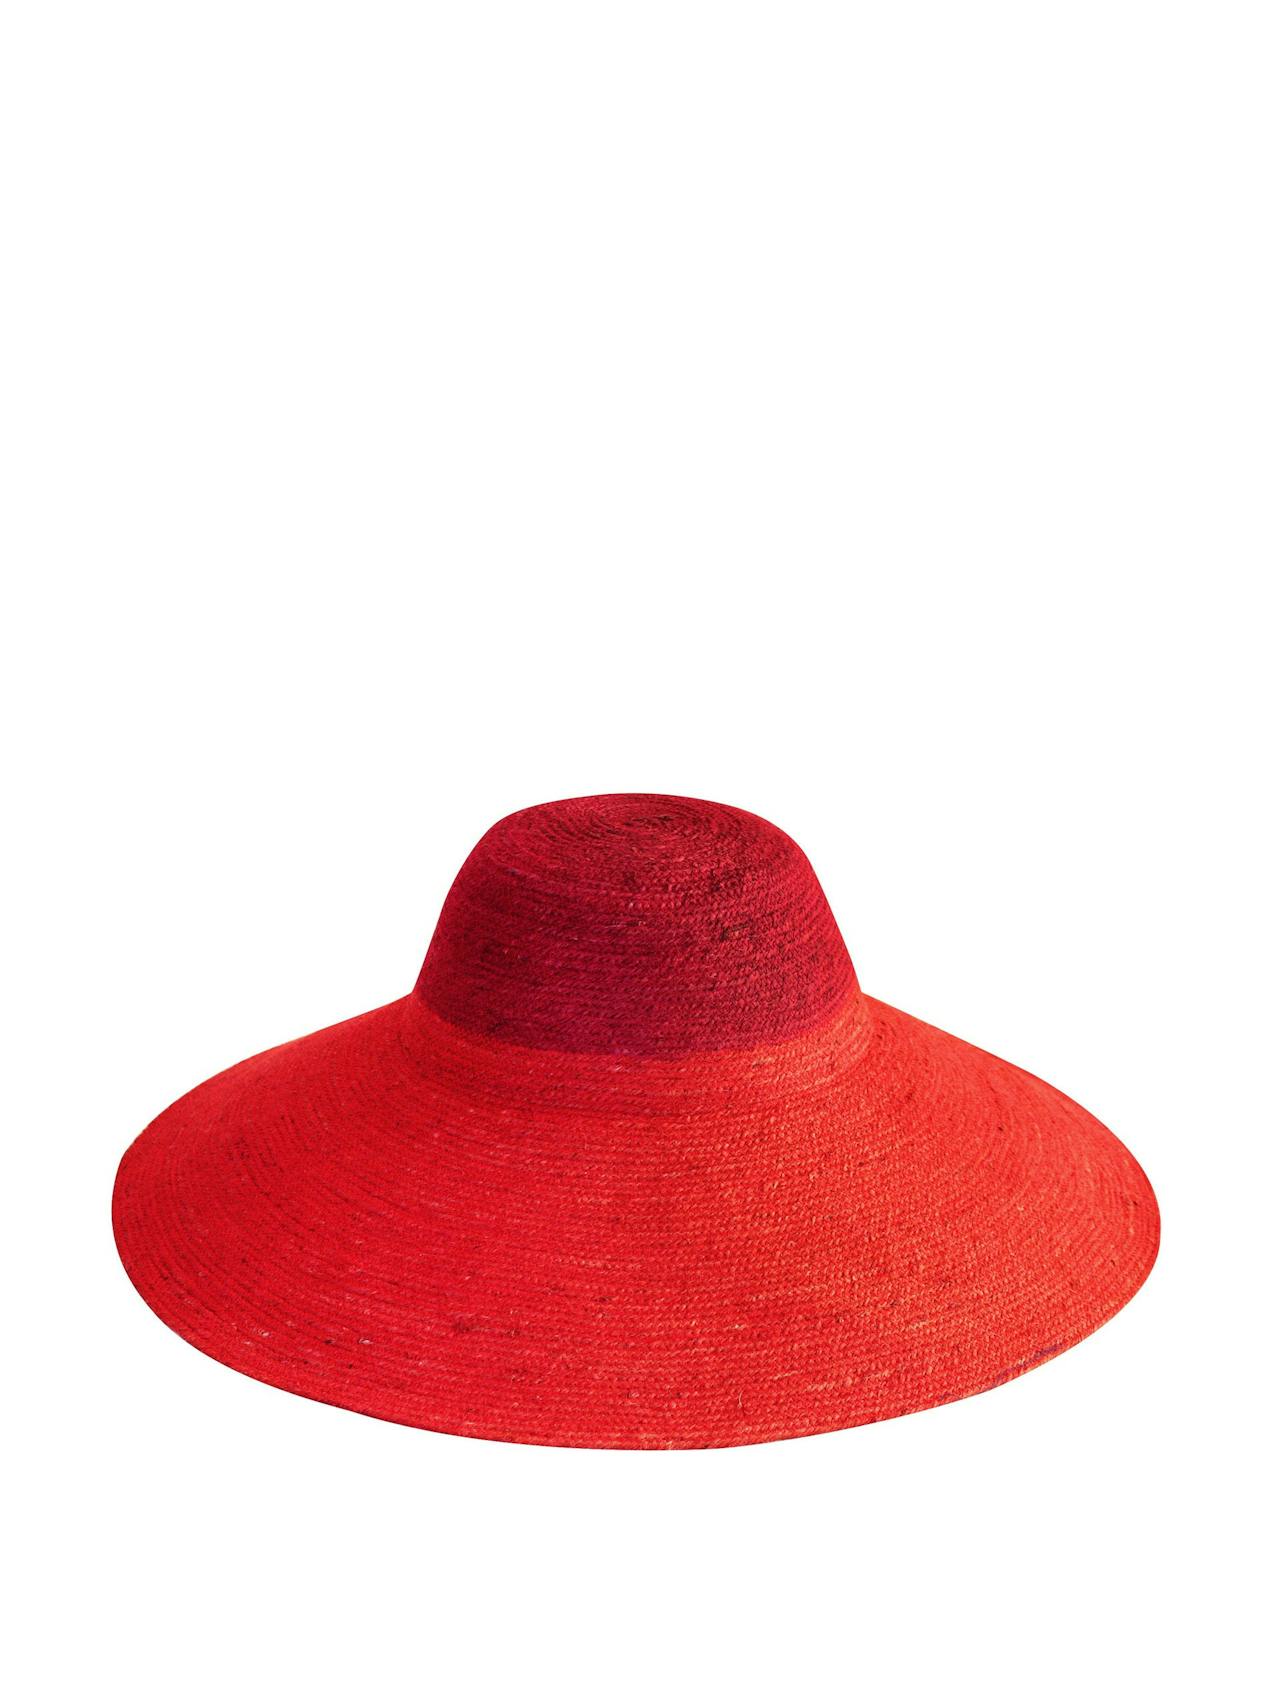 Riri duo jute handwoven straw hat in red and maroon